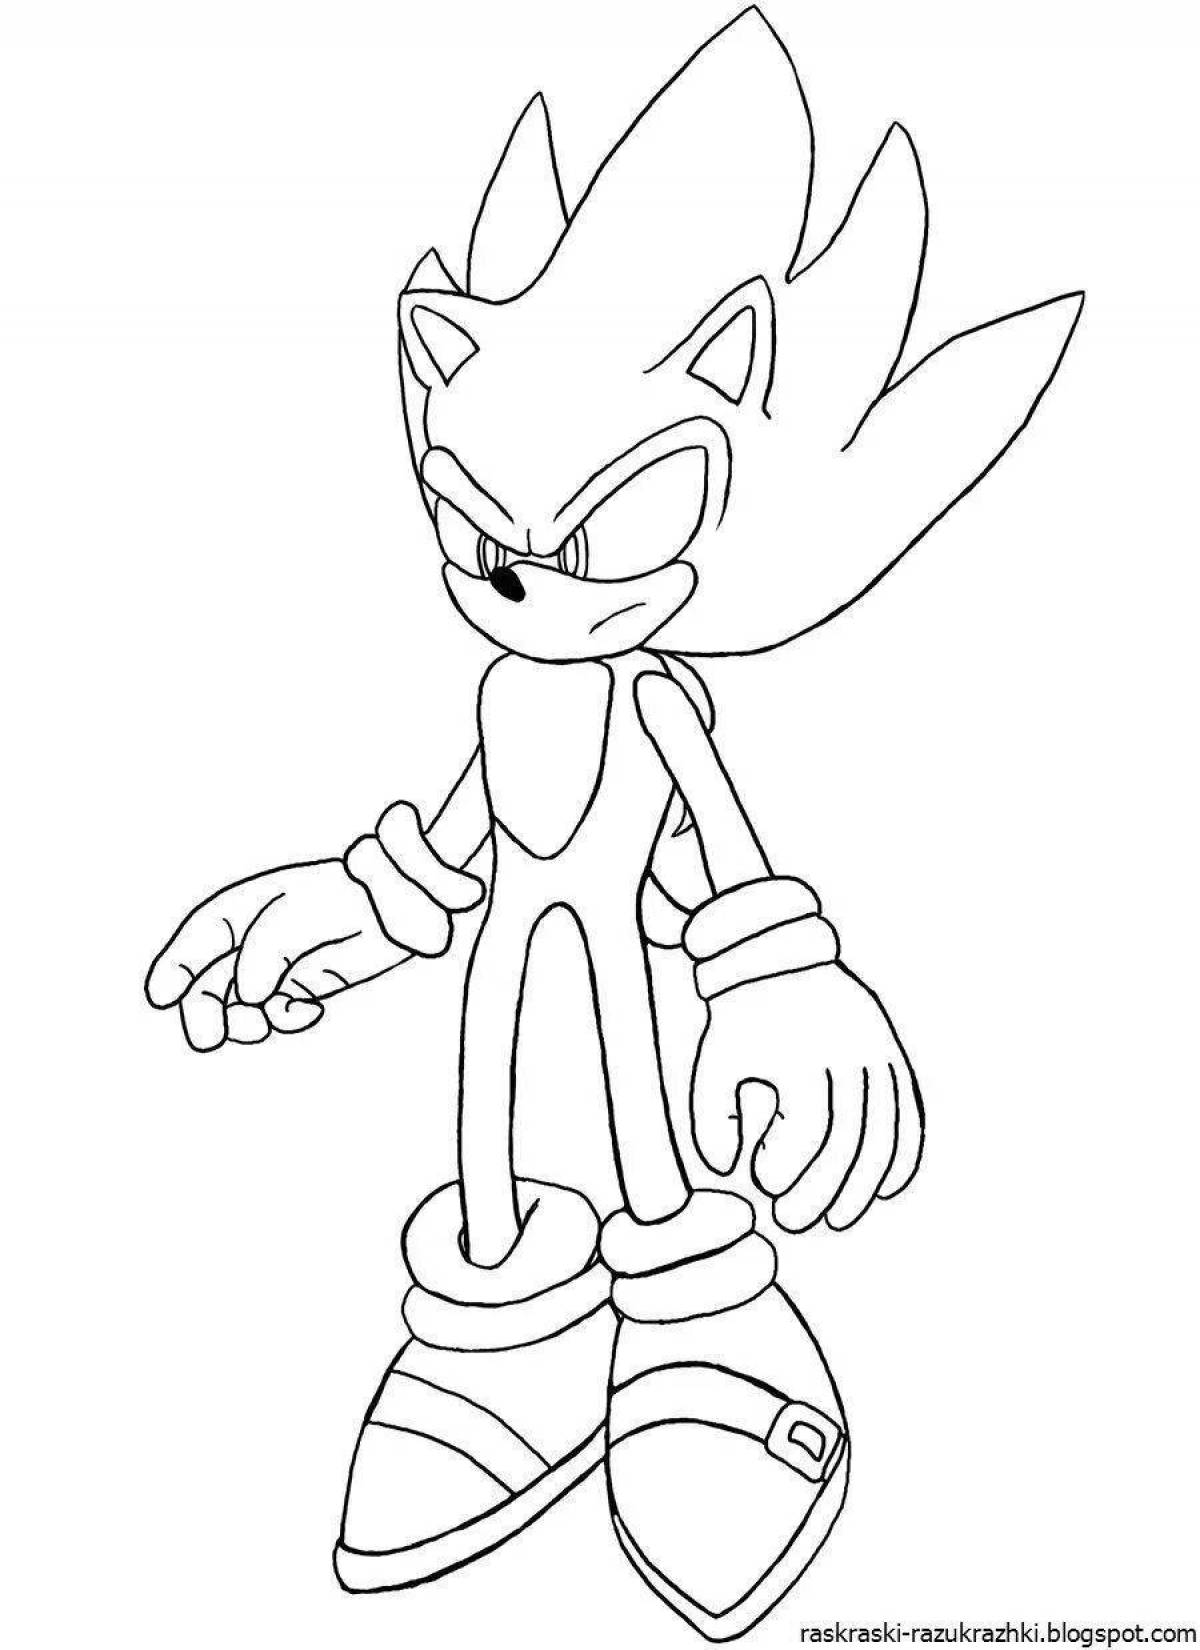 Mega sonic animated coloring page